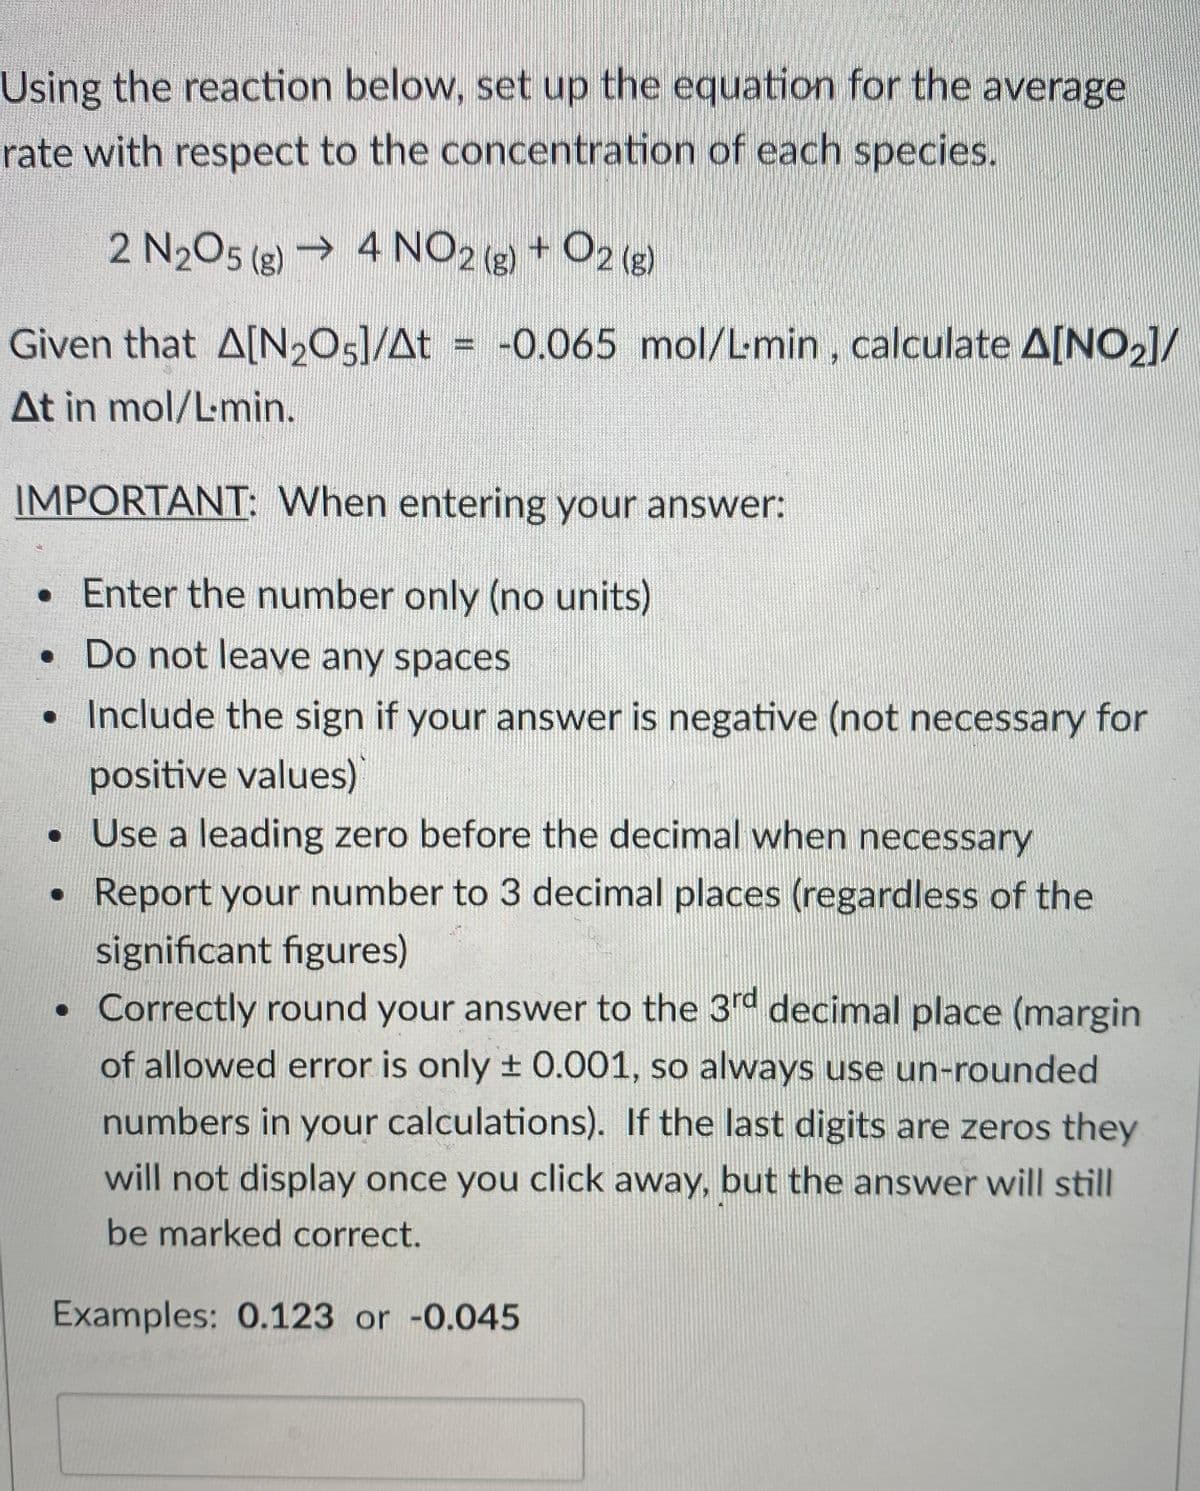 Using the reaction below, set up the equation for the average
rate with respect to the concentration of each species.
2 N2O5 (g) → 4 NO2 + O2 (g)
Given that A[N205]/At = -0.065 mol/Lmin, calculate A[NO2]/
At in mol/Lmin.
IMPORTANT: When entering your answer:
•Enter the number only (no units)
• Do not leave any spaces
•Include the sign if your answer is negative (not necessary for
positive values)
• Use a leading zero before the decimal when necessary
• Report your number to 3 decimal places (regardless of the
significant figures)
• Correctly round your answer to the 3rd decimal place (margin
of allowed error is only ± 0.001, so always use un-rounded
numbers in your calculations). If the last digits are zeros they
will not display once you click away, but the answer will still
be marked correct.
Examples: 0.123 or -0.045
